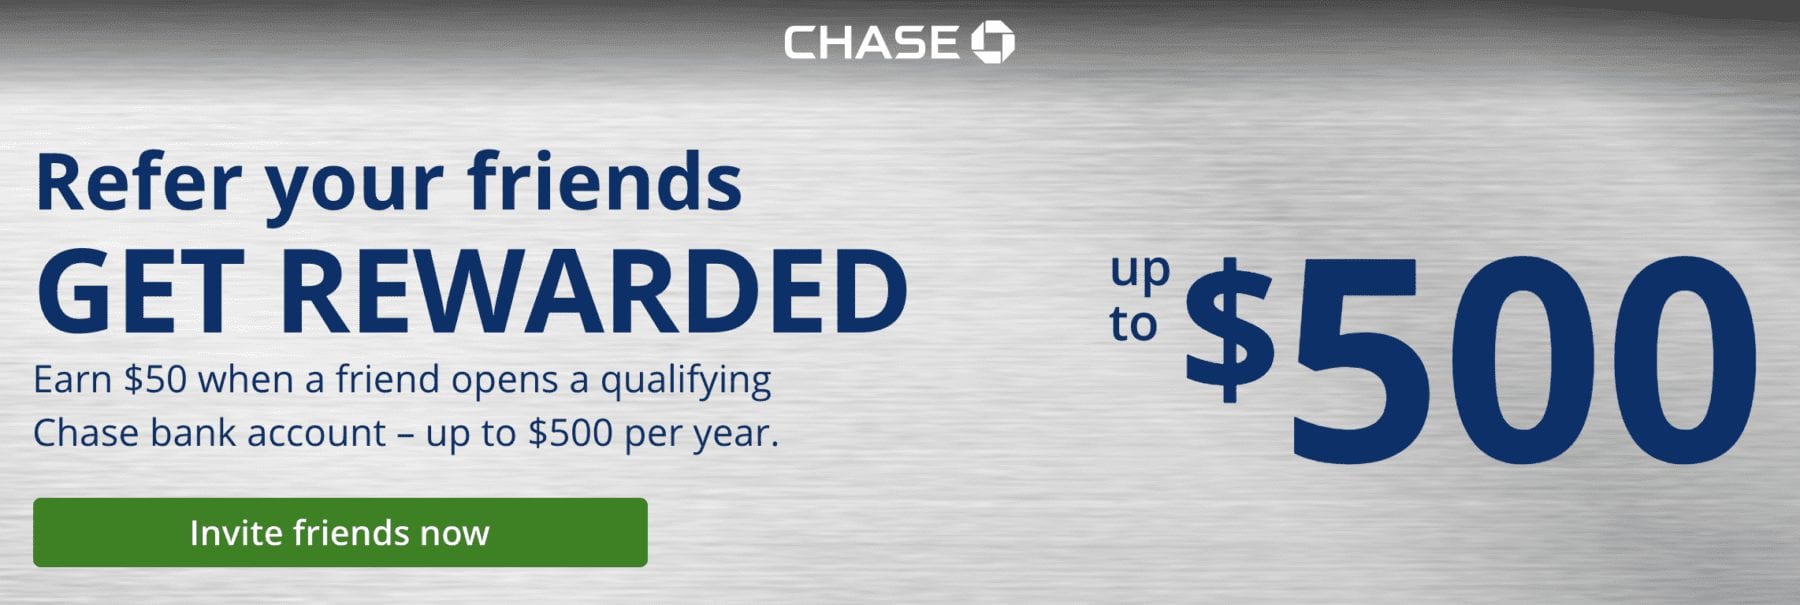 chase bank new savings account offers